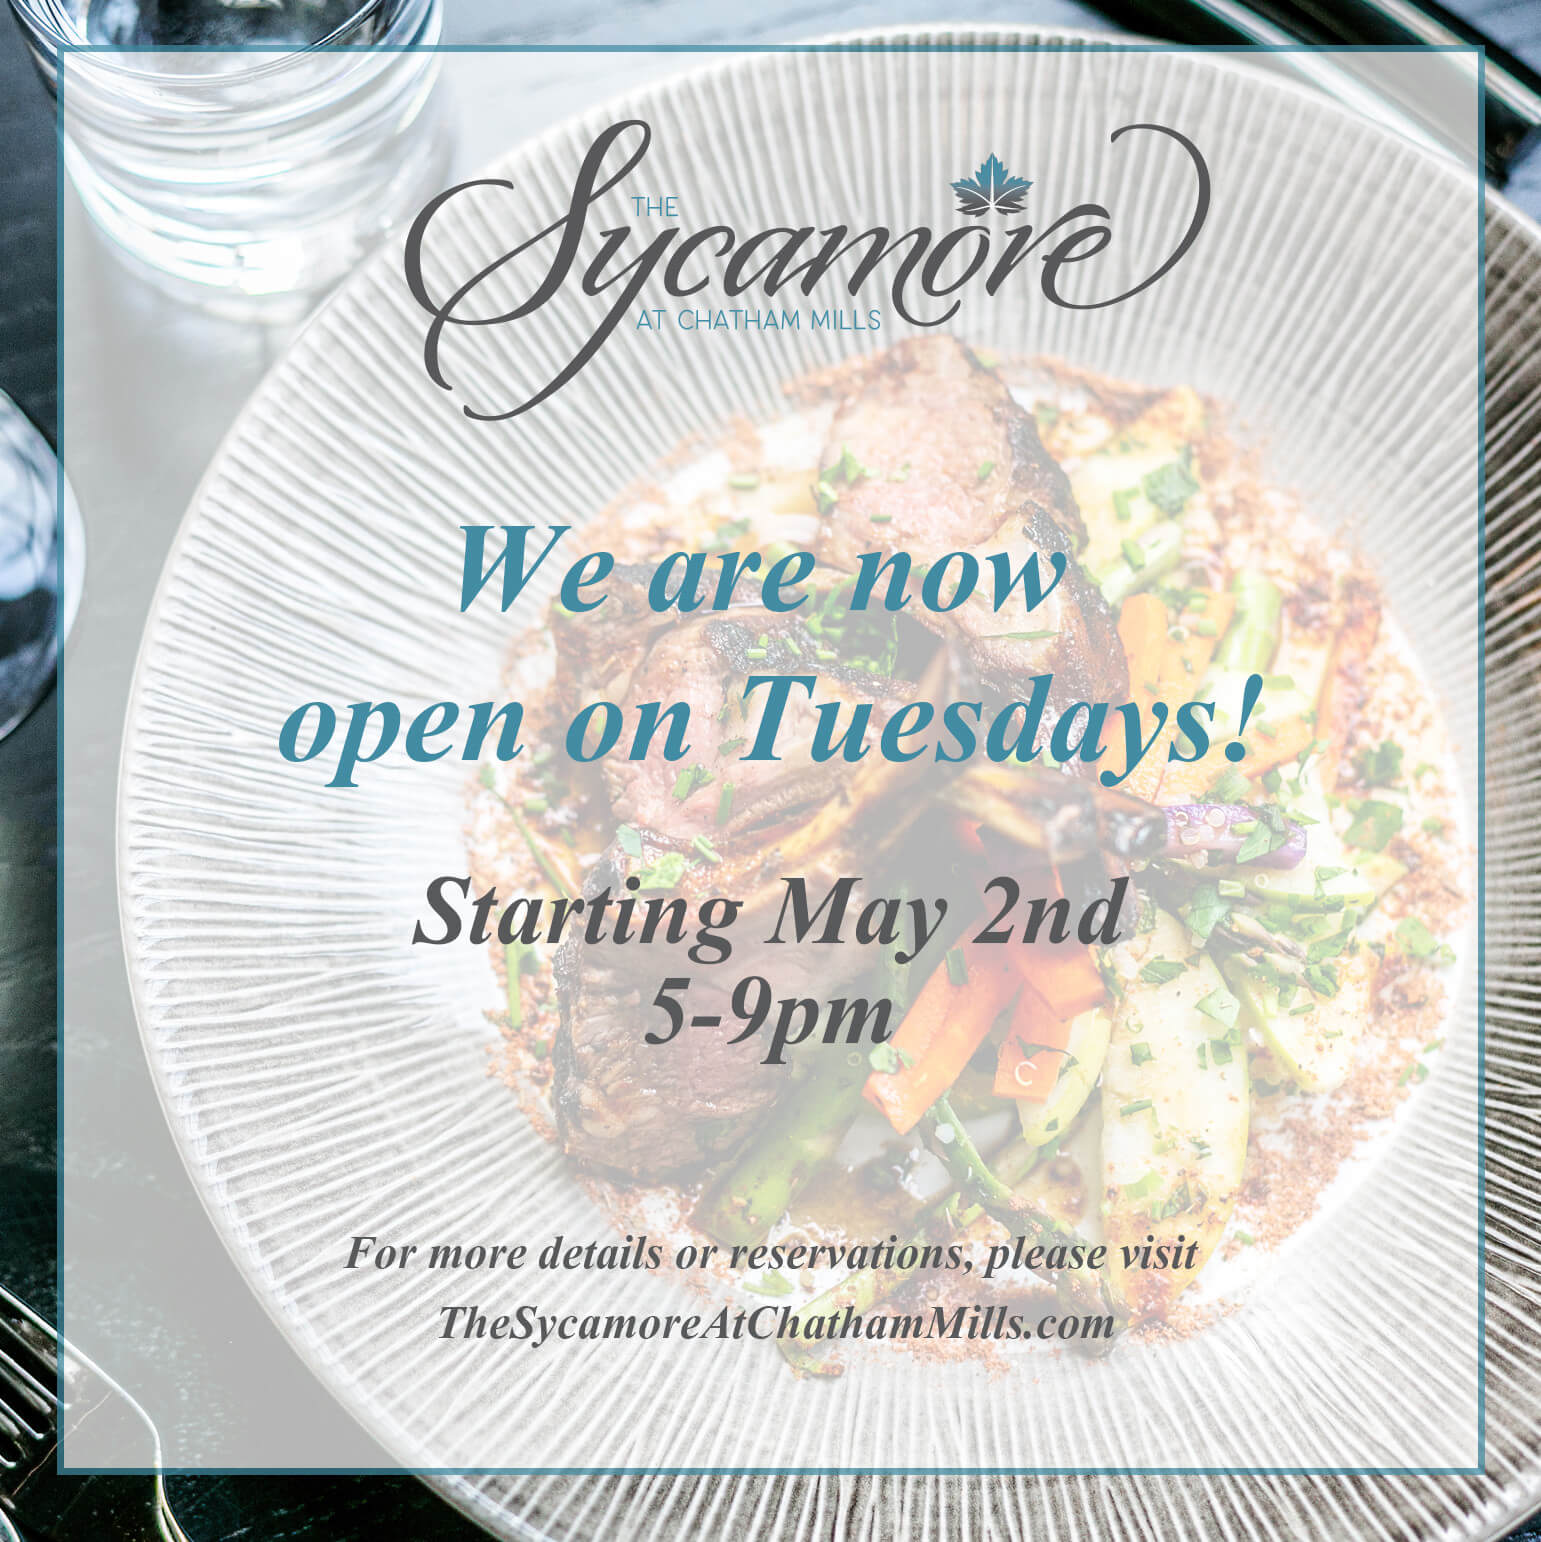 The Sycamore is now open on Tuesdays.